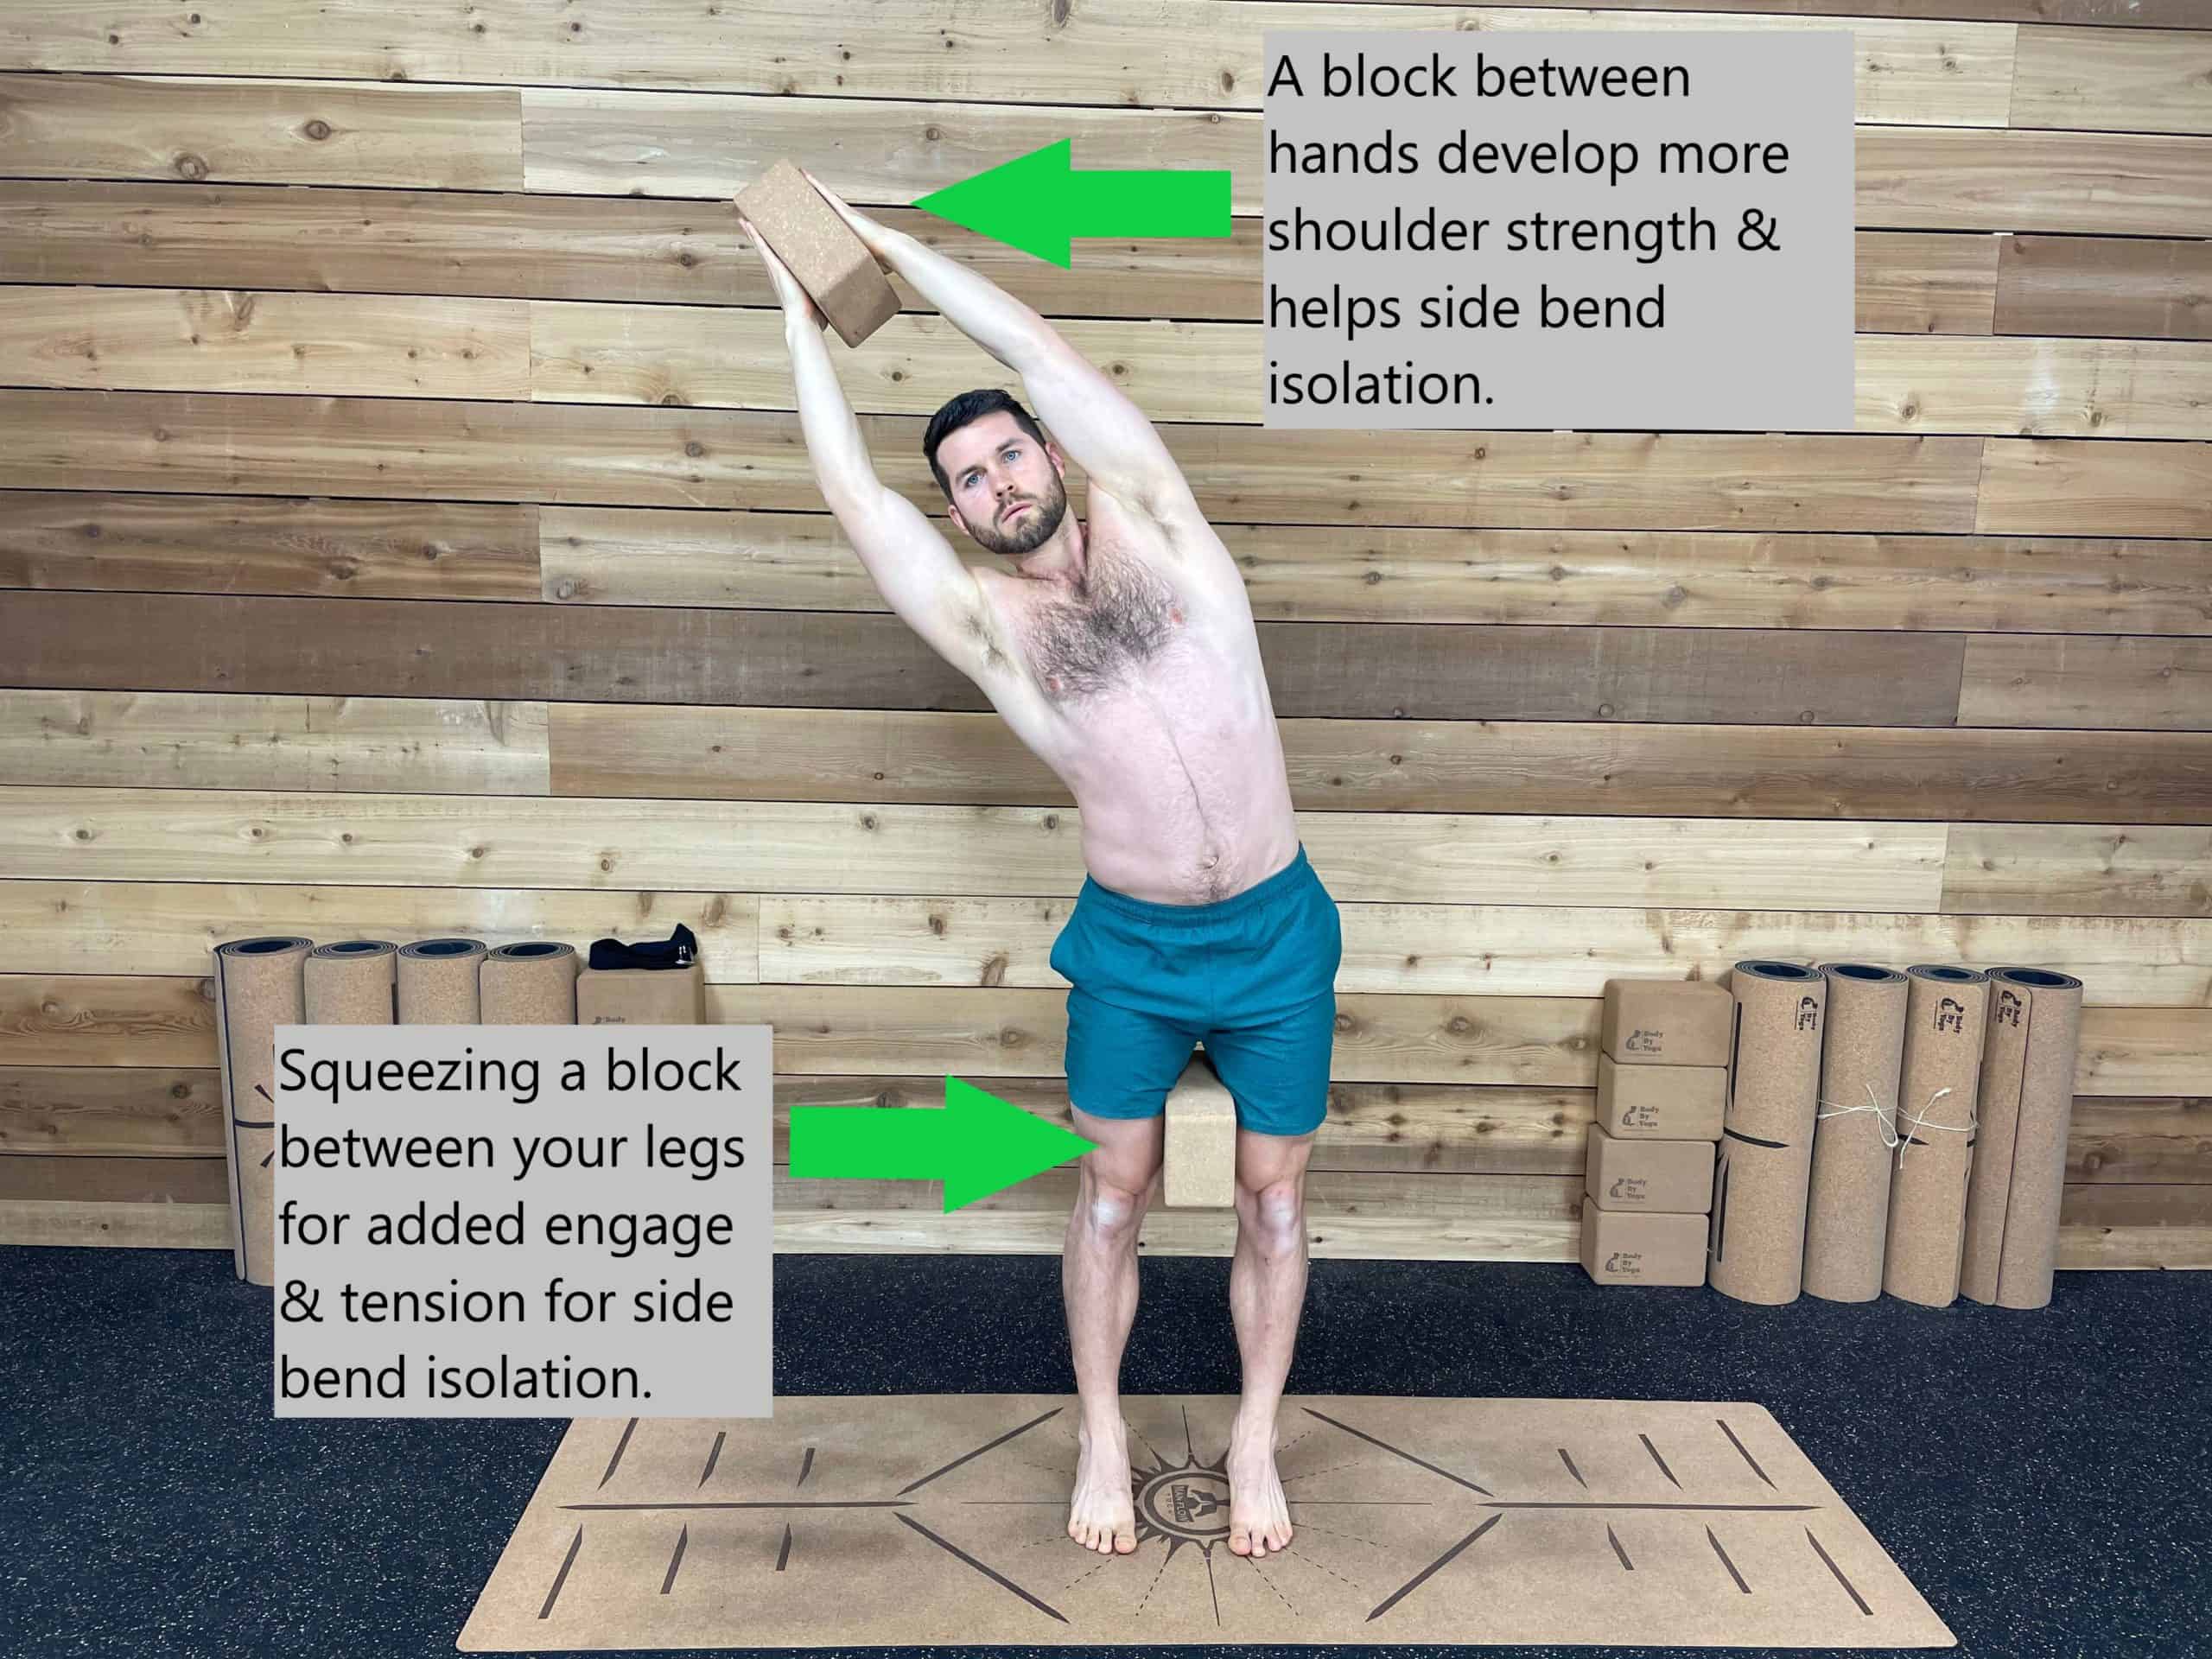 How to Use Yoga Blocks for Strength - Side Bends